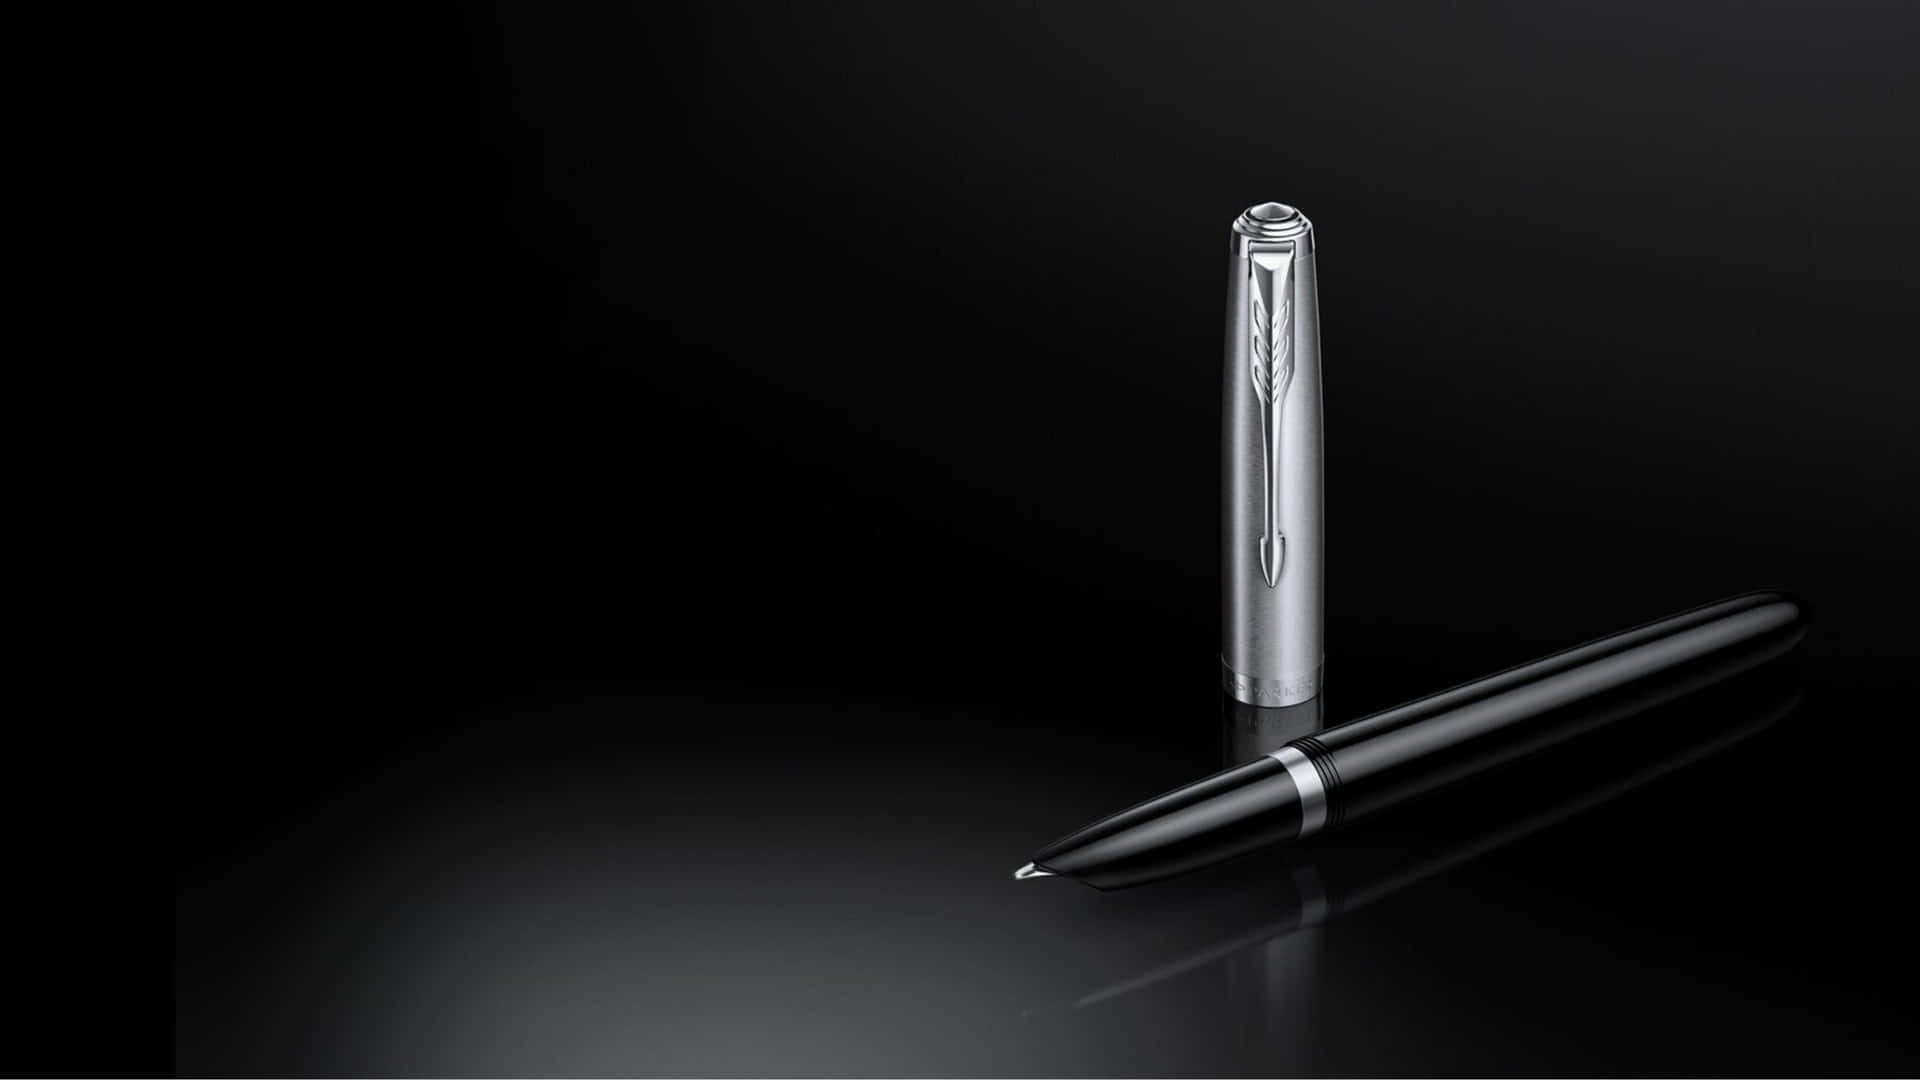 A Pen With A Black And Silver Finish On A Black Surface